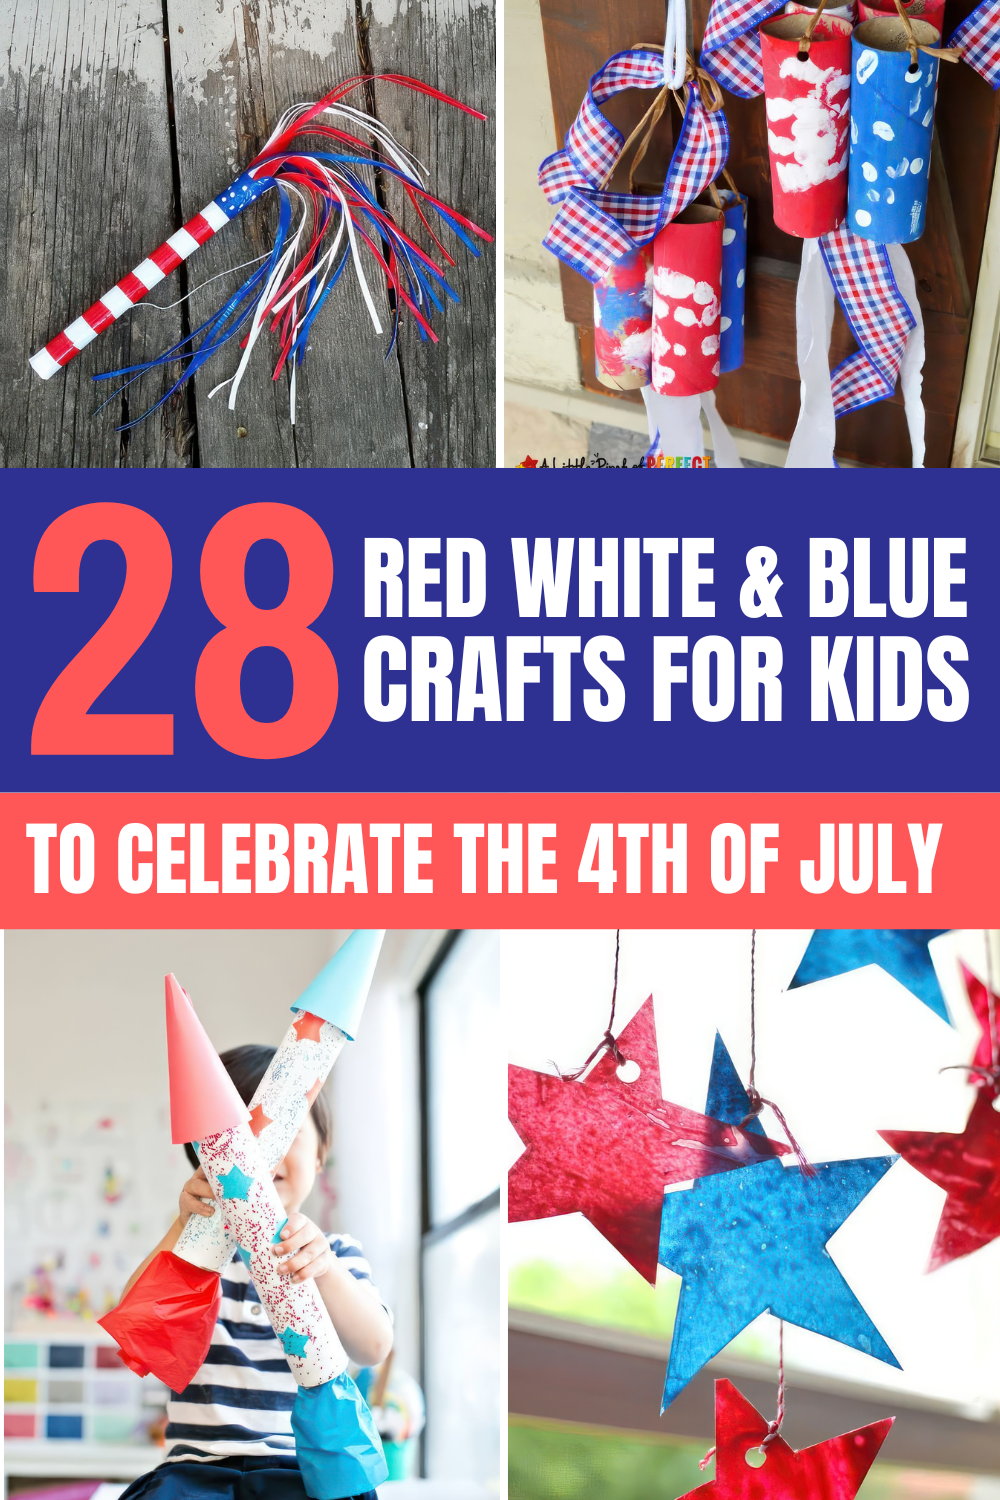 Looking for festive craft ideas to keep the kids entertained? Check out this collection of creative red, white, and blue projects perfect for Independence Day! Click now to see all the fun and easy crafts! 🎨🇺🇸